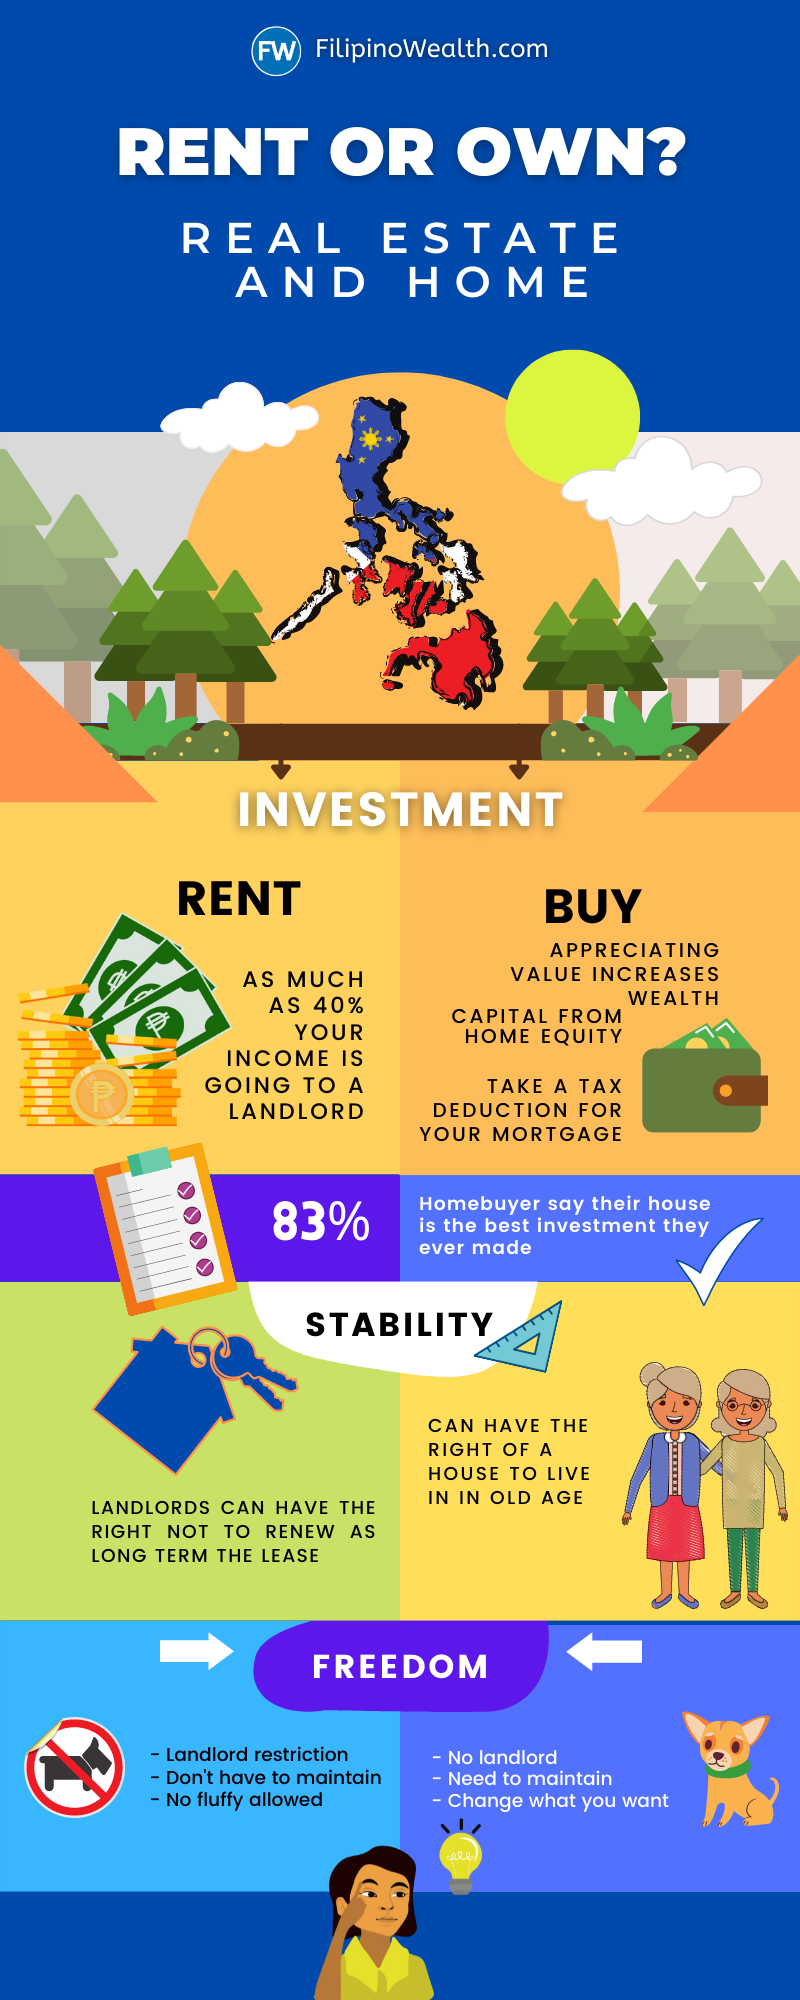 invest real estate with no money philippines 